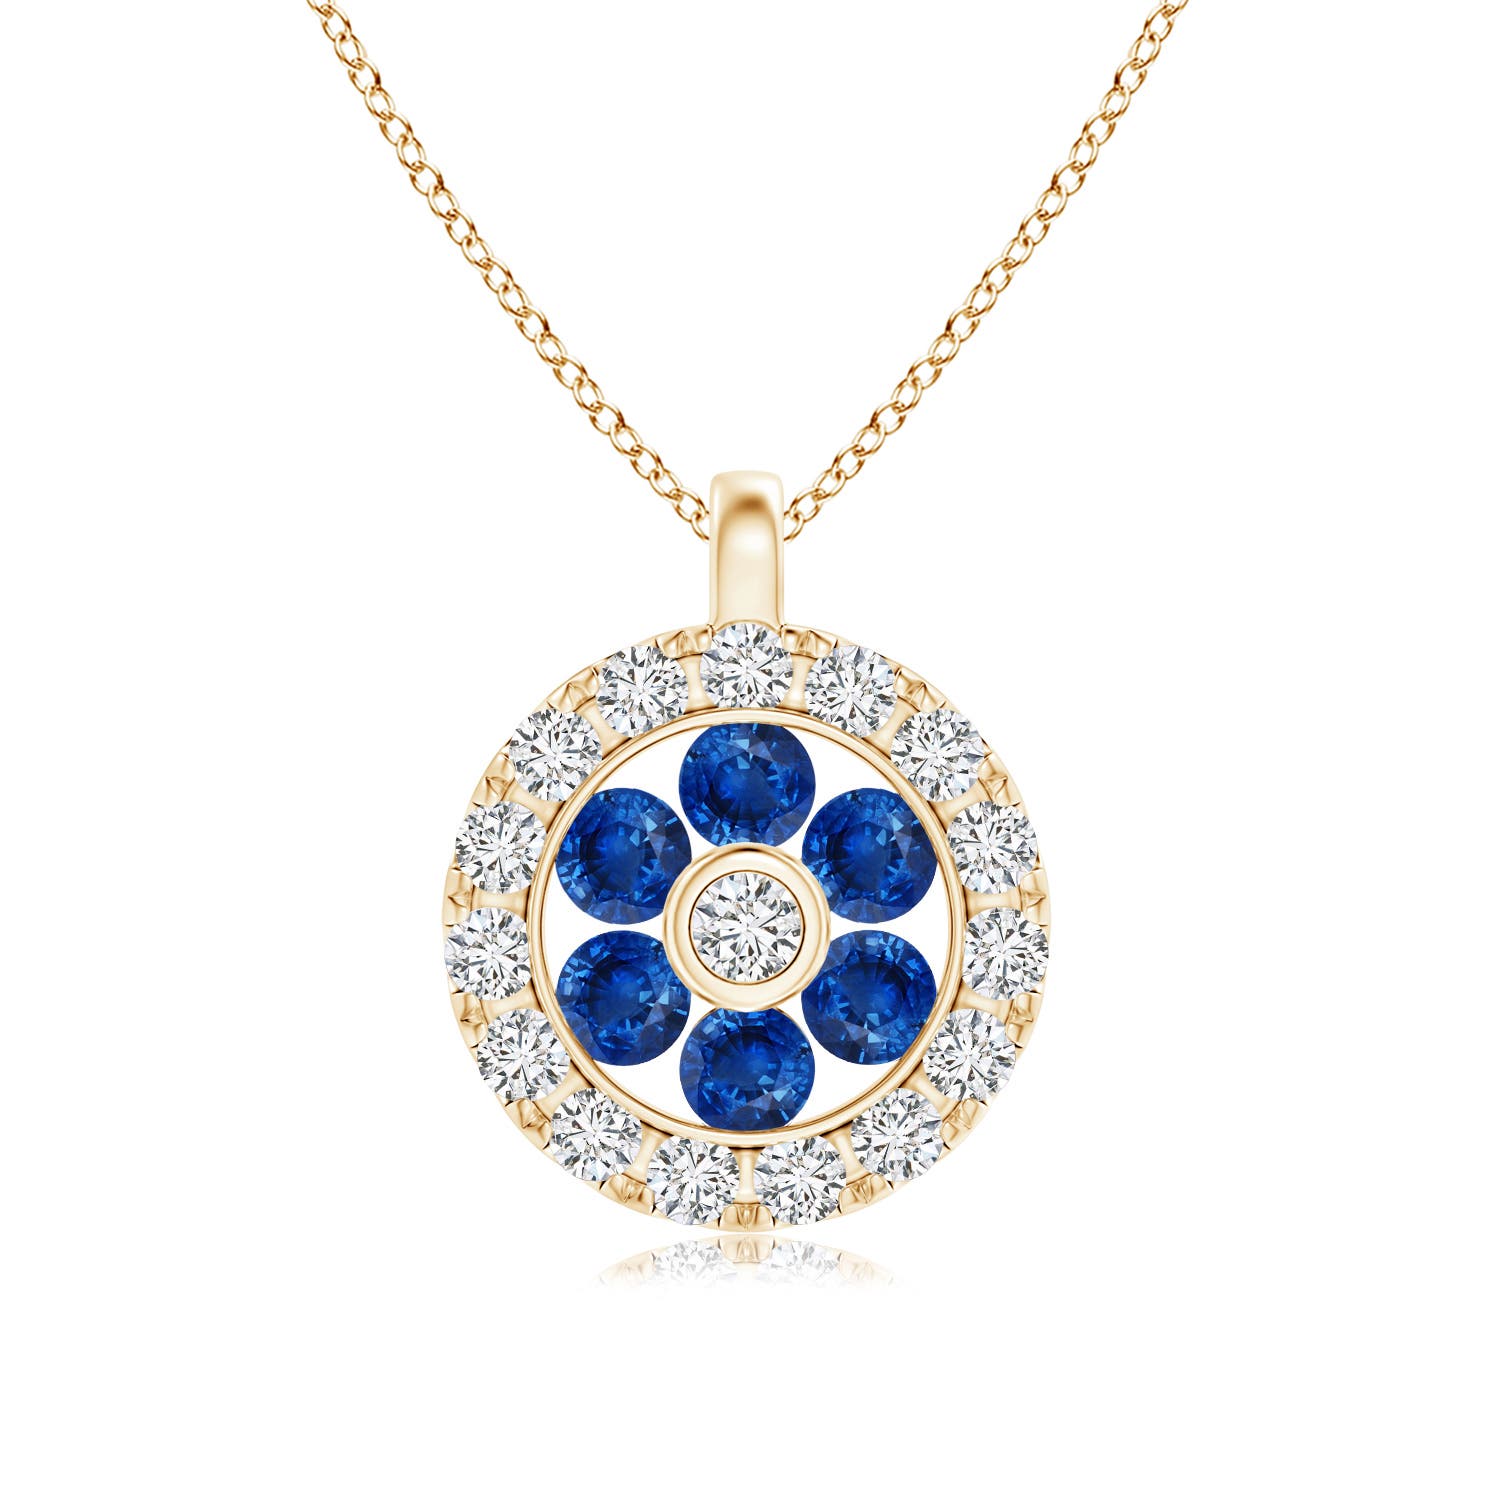 AAA - Blue Sapphire / 0.21 CT / 14 KT Yellow Gold